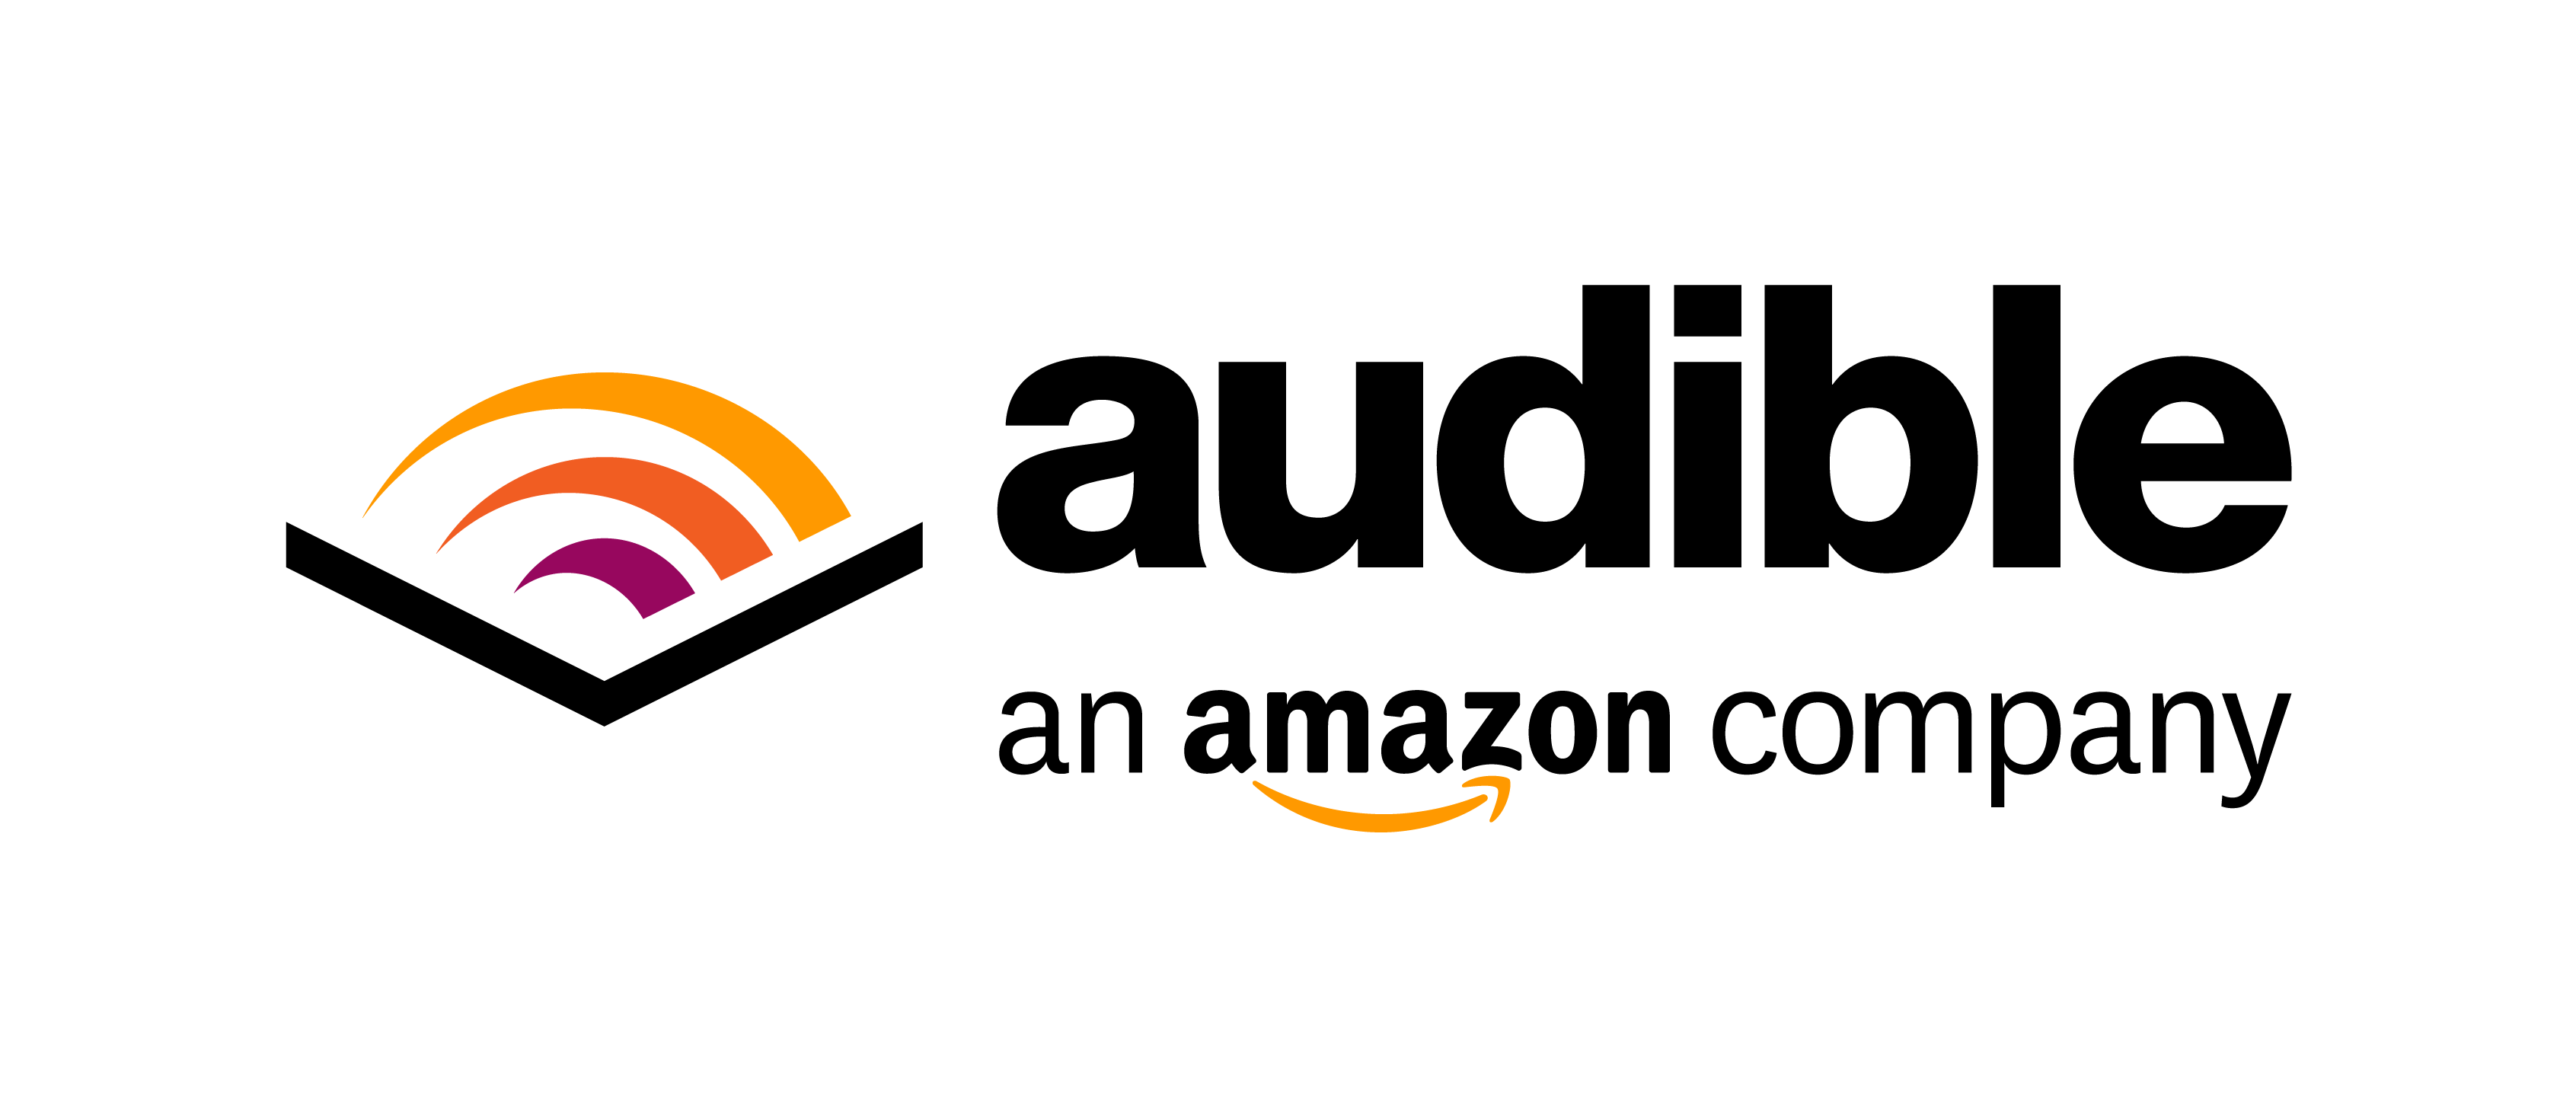 Audible.com Logo - I've fallen in love with….AUDIBLE!